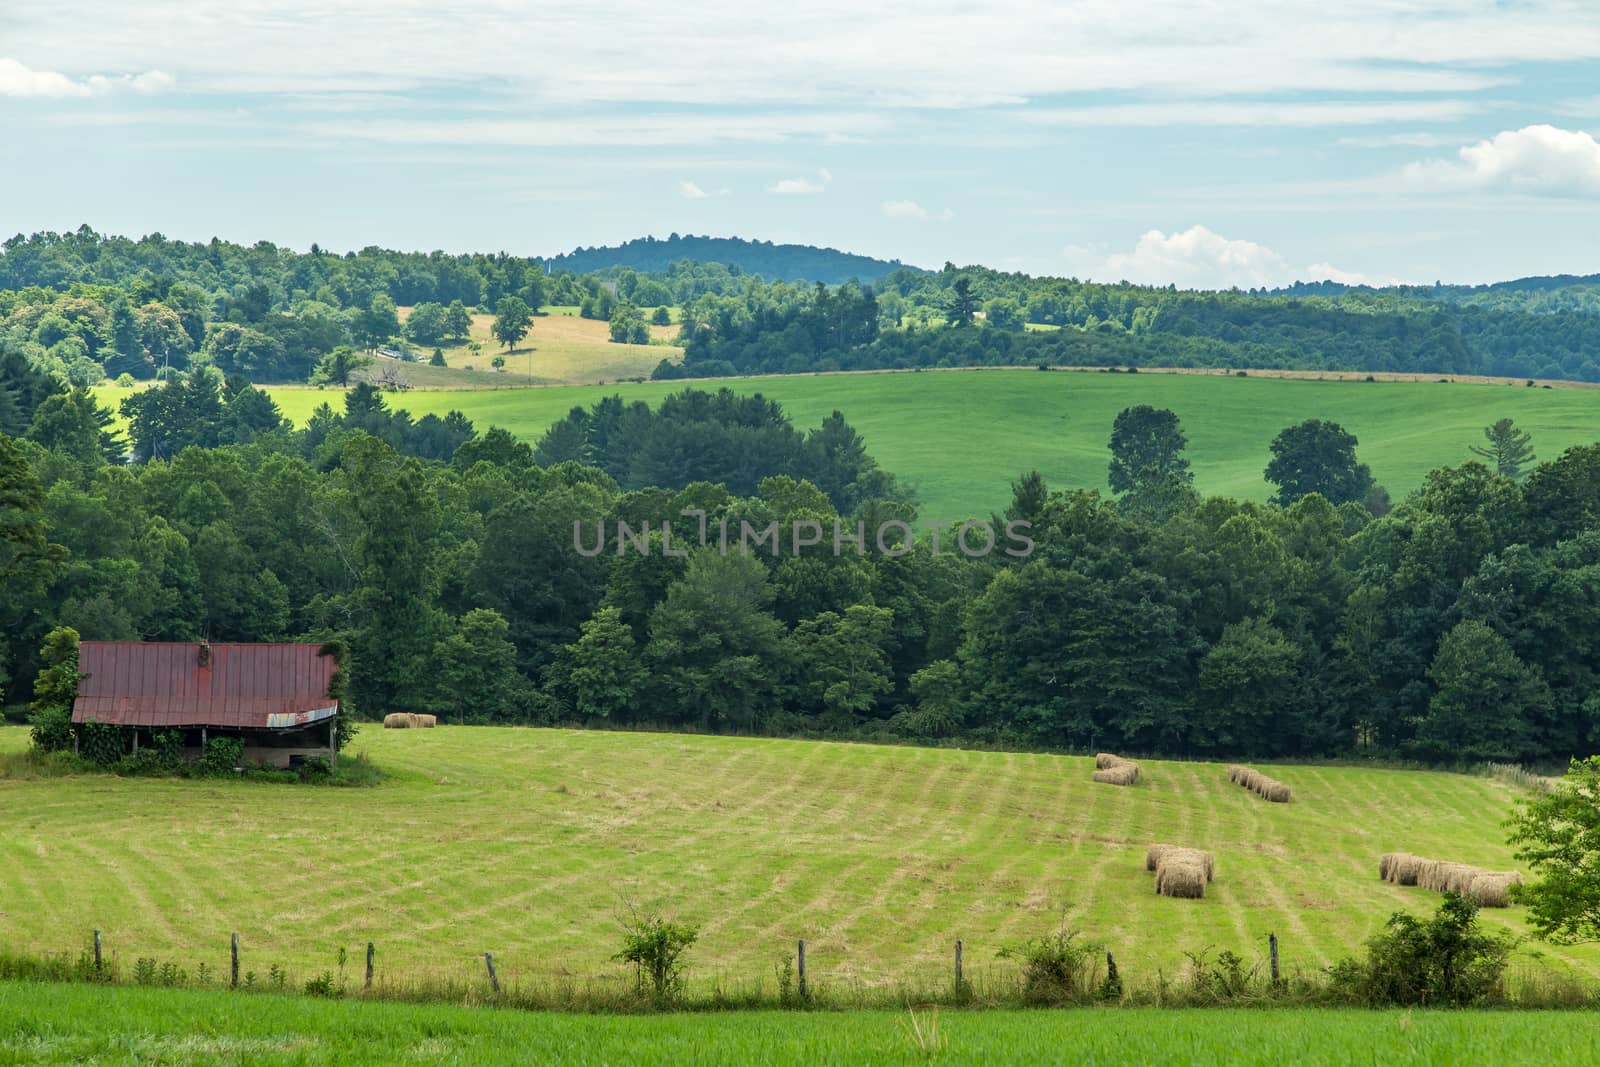 A view of an old barn in the foothills of the Blue Ridge Mountains in Carroll County, Virginia